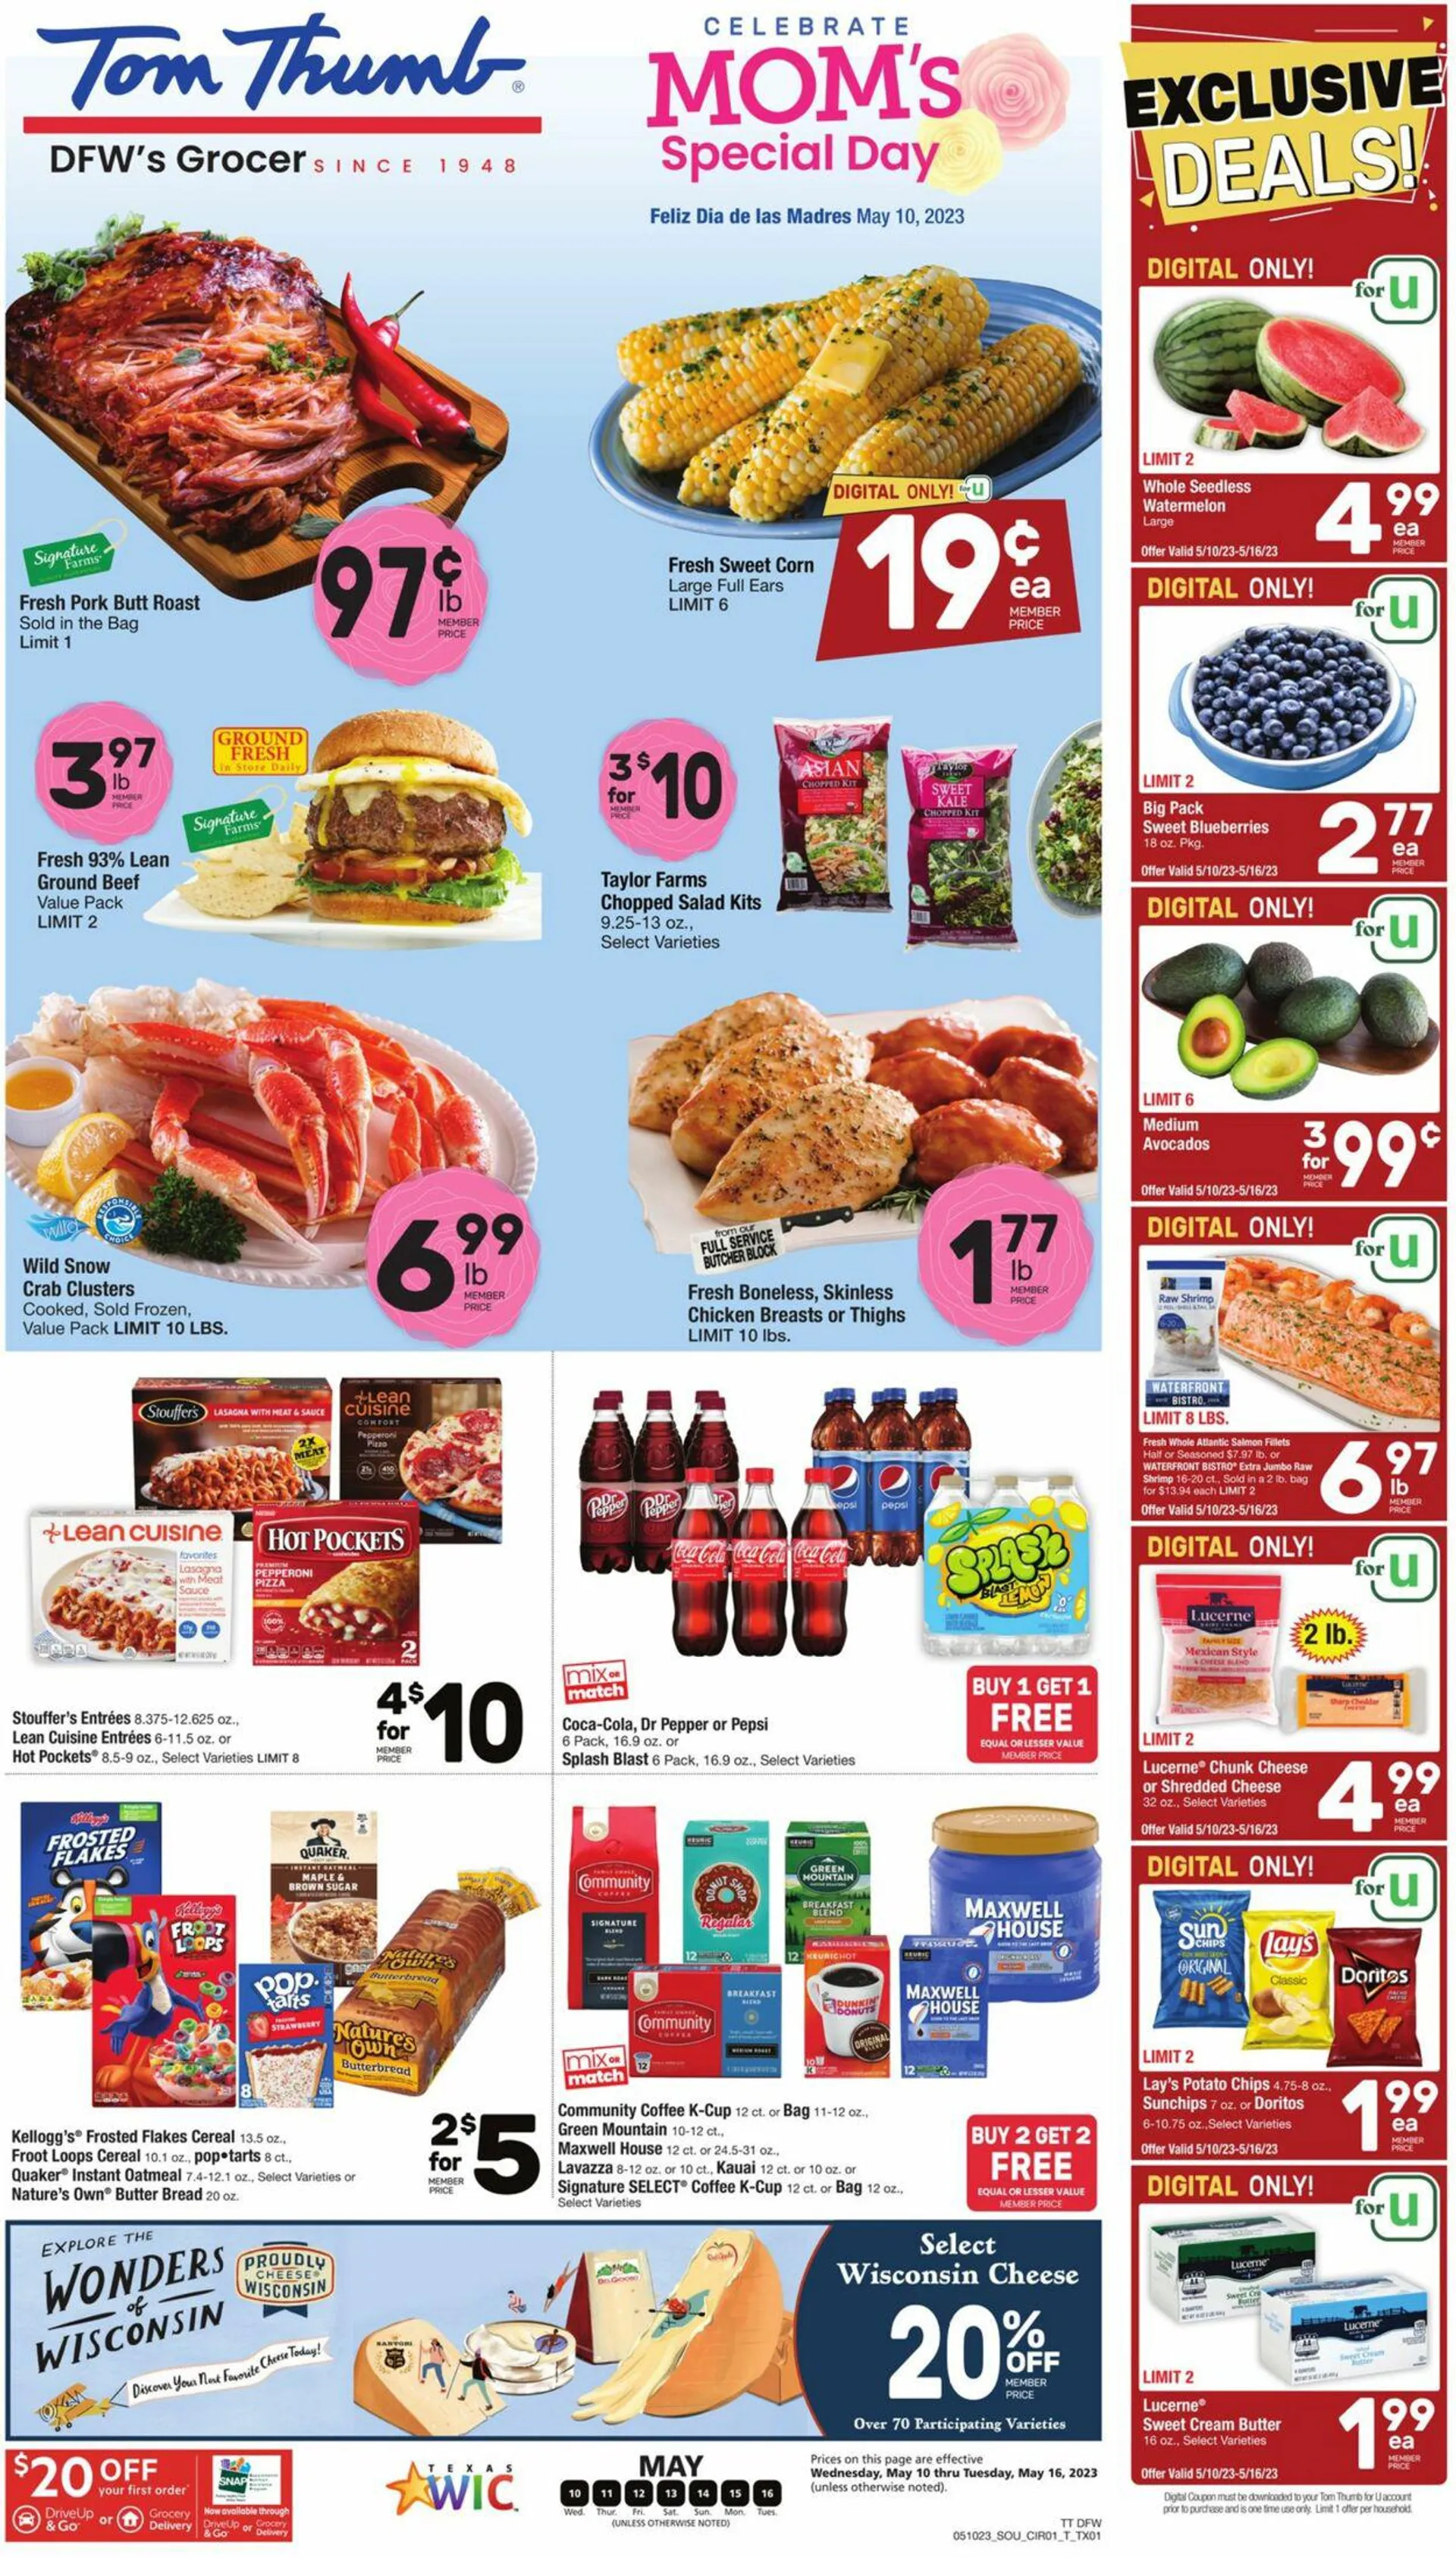 Tom Thumb Current weekly ad - 2